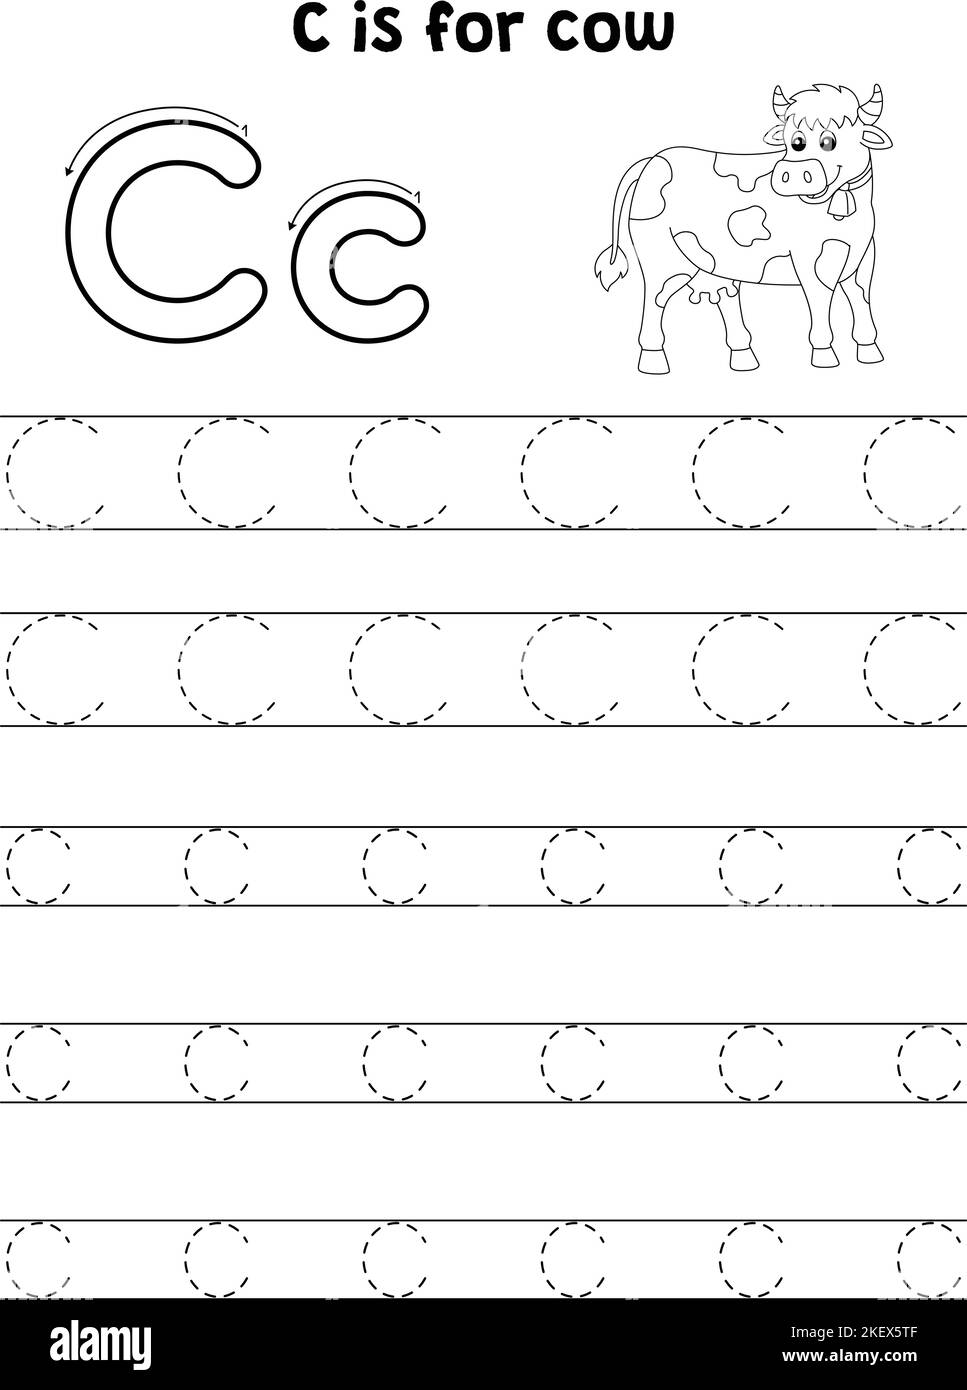 Cow animal tracing letter abc coloring page c stock vector image art